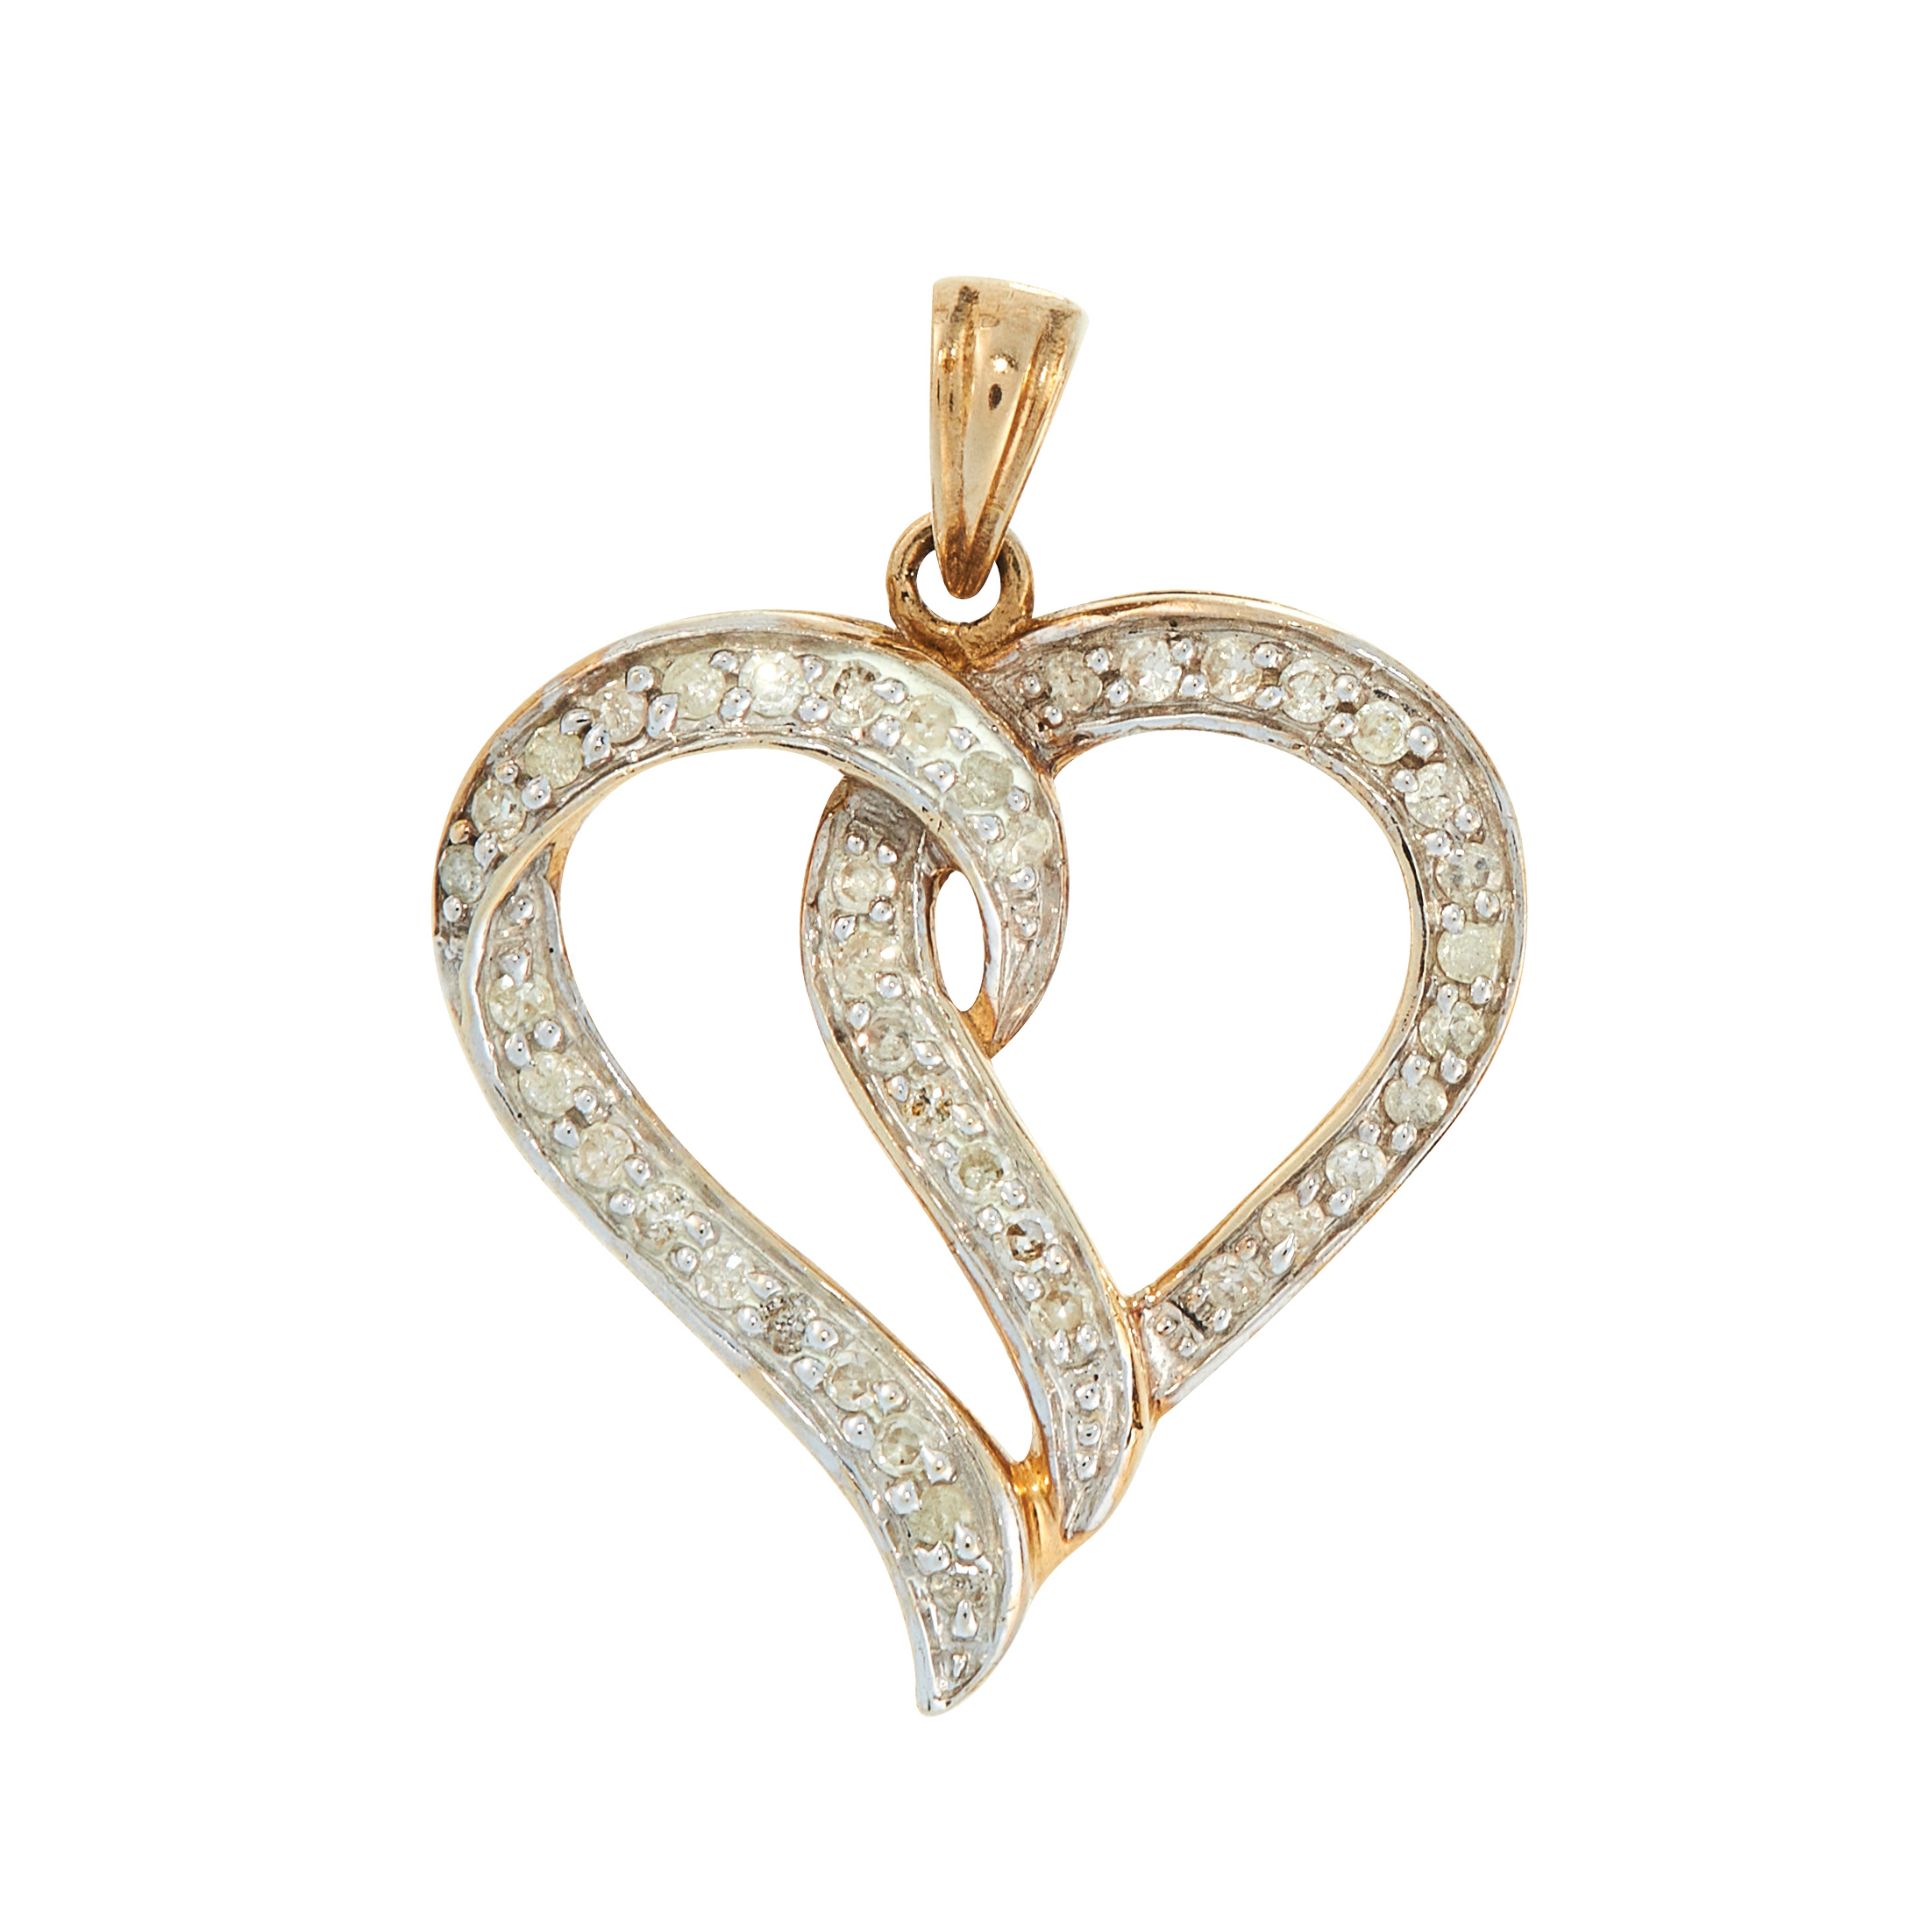 A DIAMOND HEART PENDANT in yellow gold, designed as a stylised heart, set with round cut diamonds,